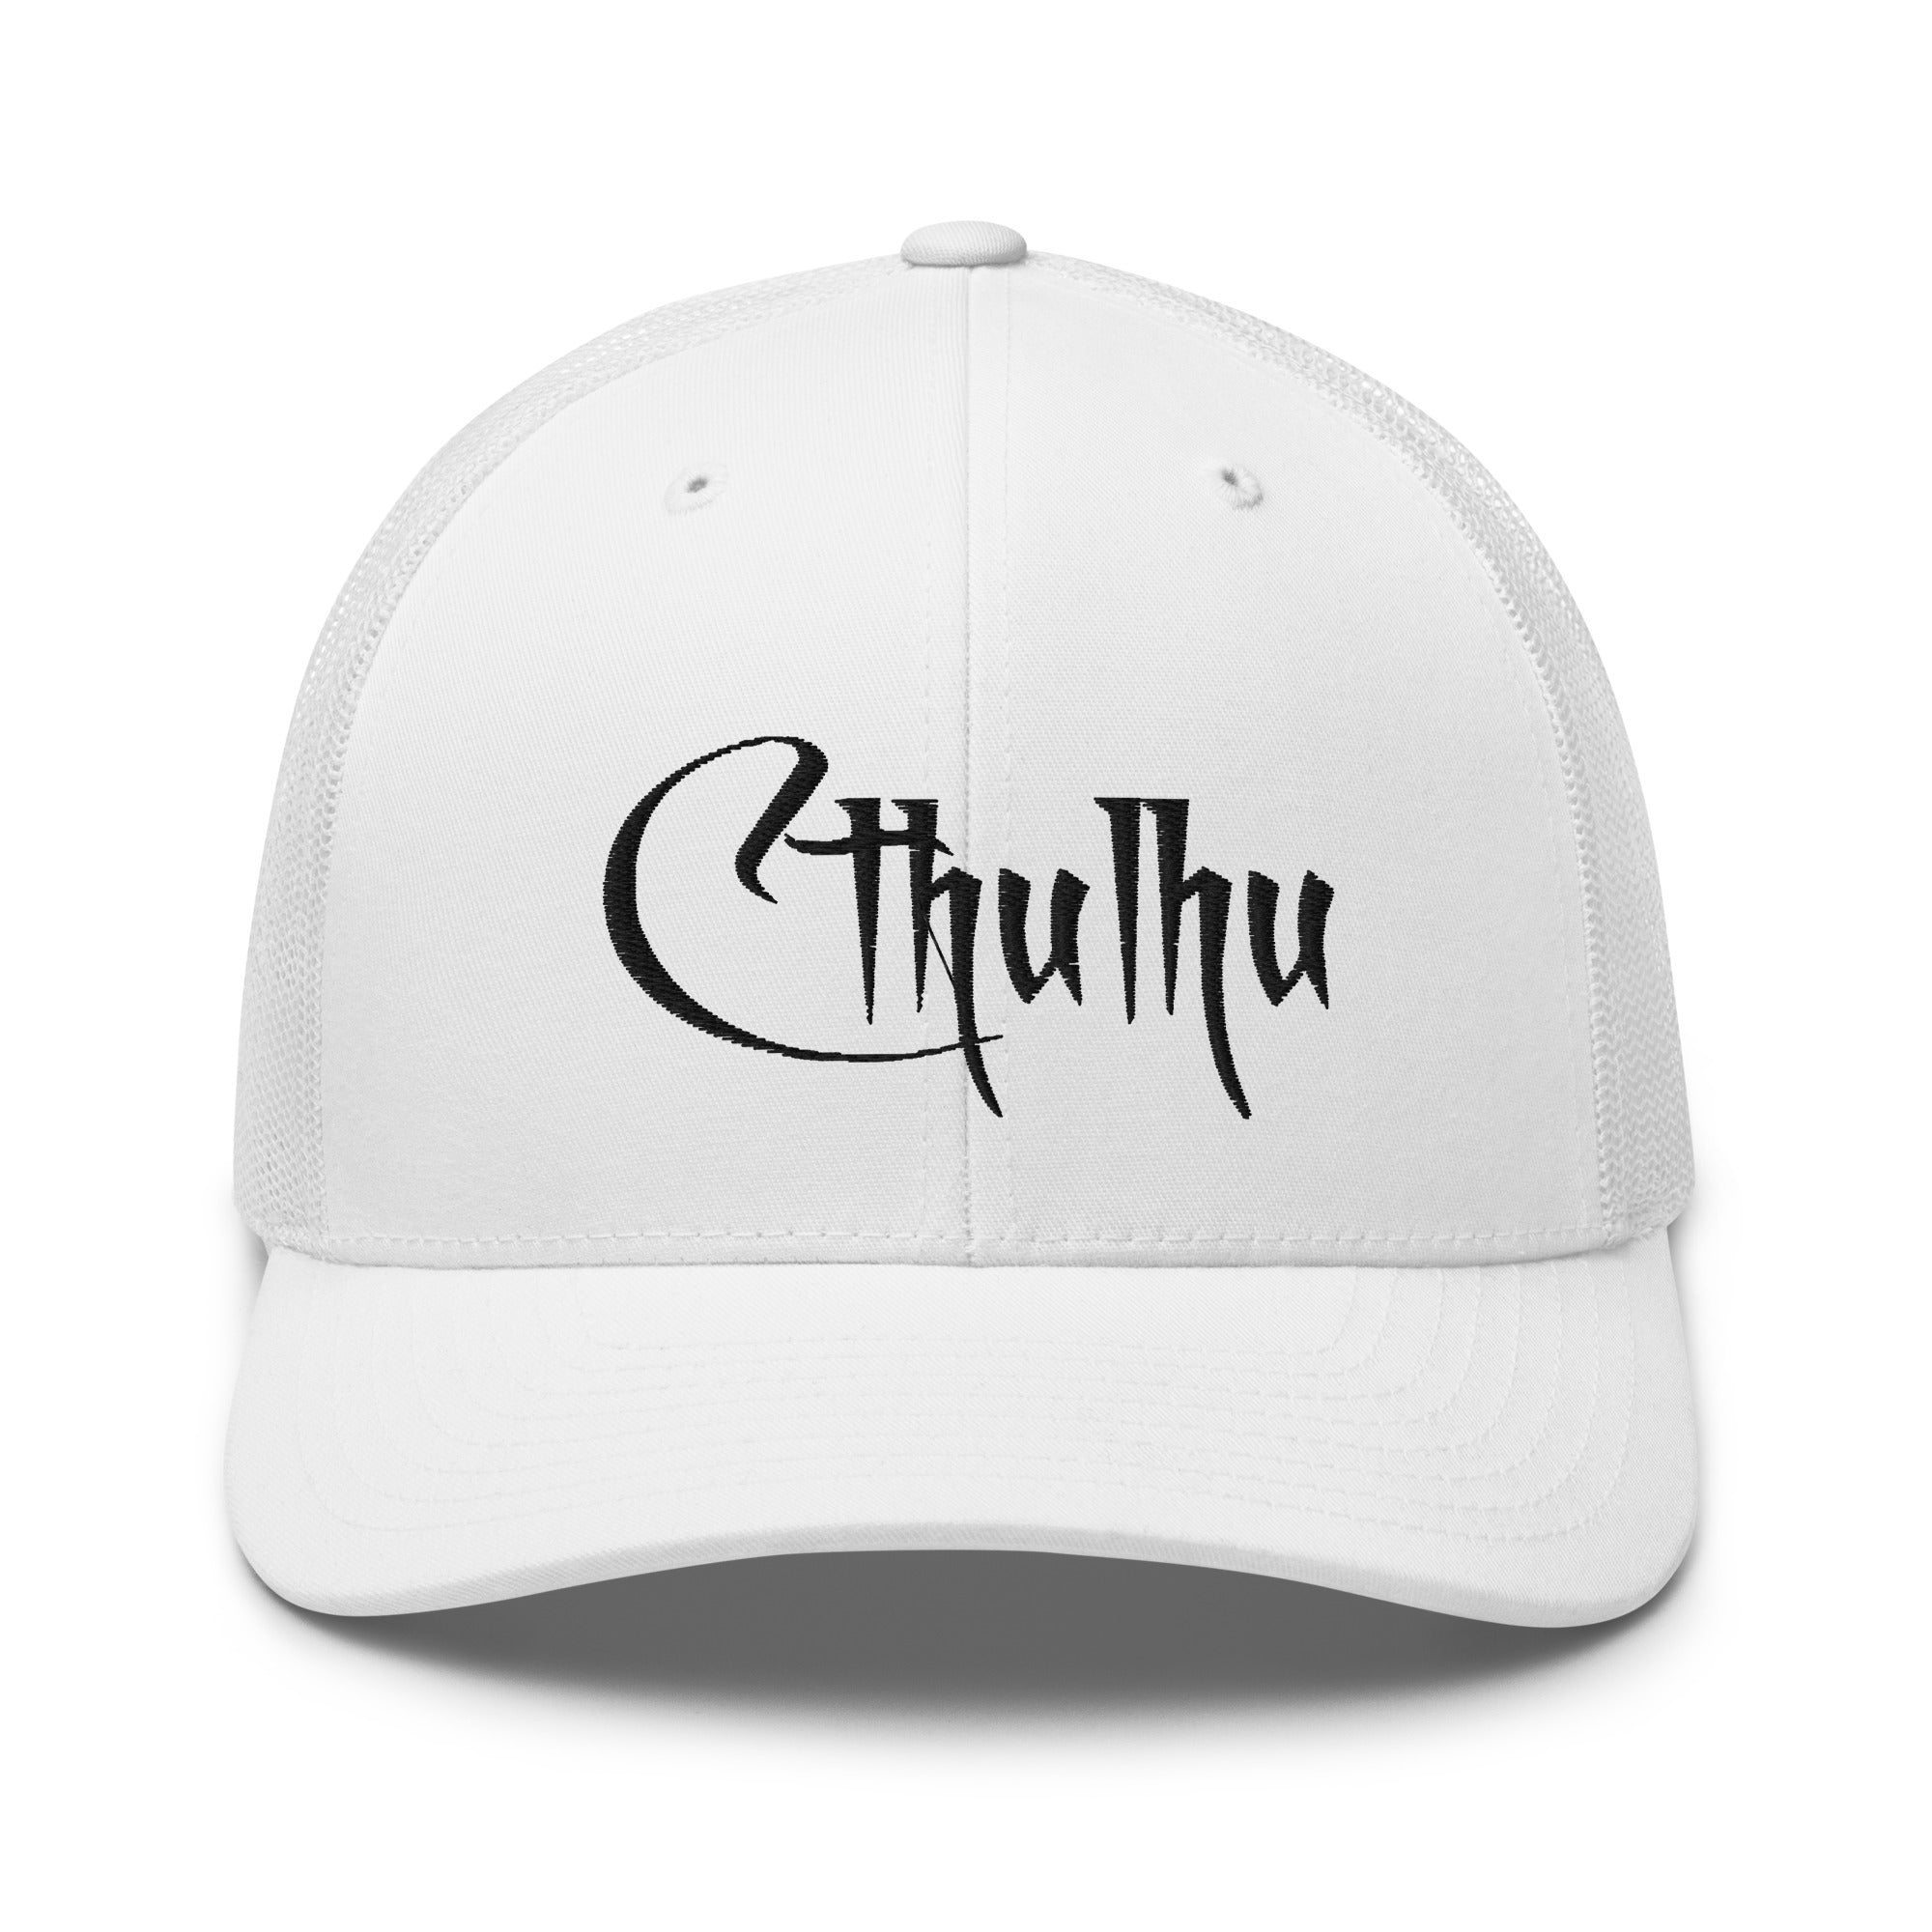 Black Call of Cthulhu Great Old Ones Embroidered Trucker Cap Snapback Hat